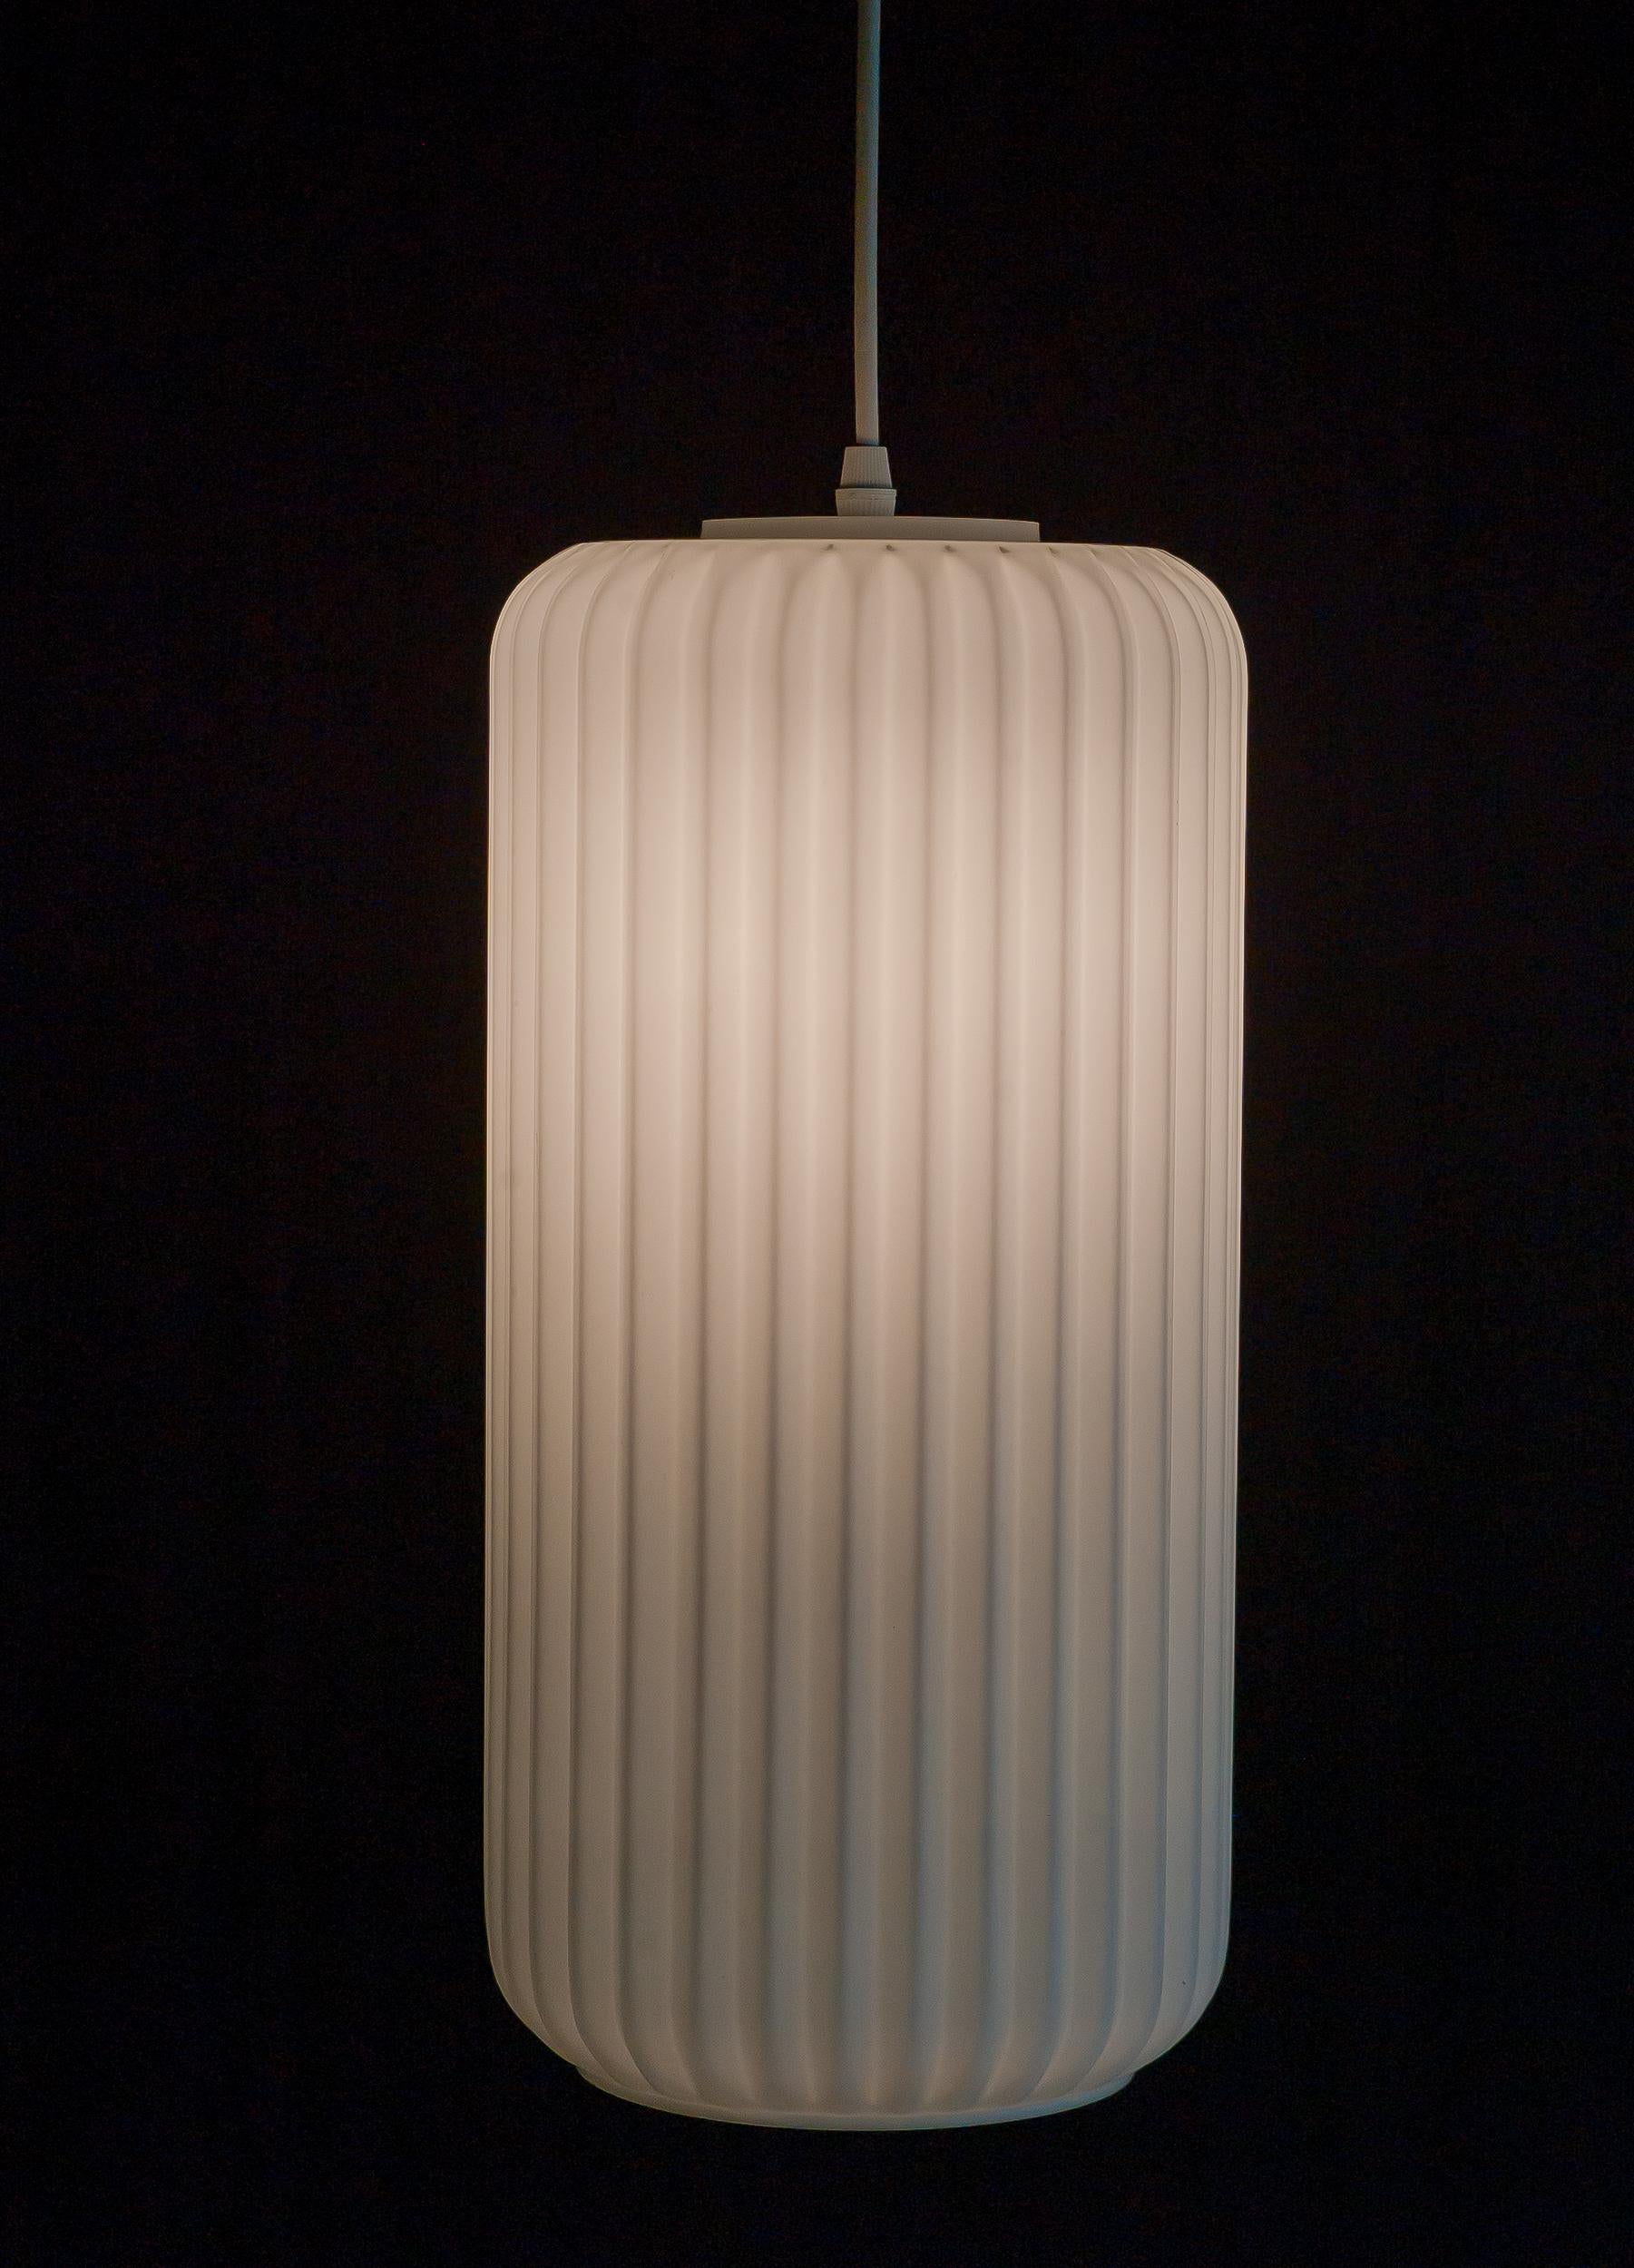 Wonderful Minimalist large 1950s ribbed opaline glass pendant with white enameled brass hardware.
Identical glass shades are used on several 1950s Angelo Lelli for Arredoluce floor lamps. 
The lamp is unmarked. We have 3 of these pendants, priced